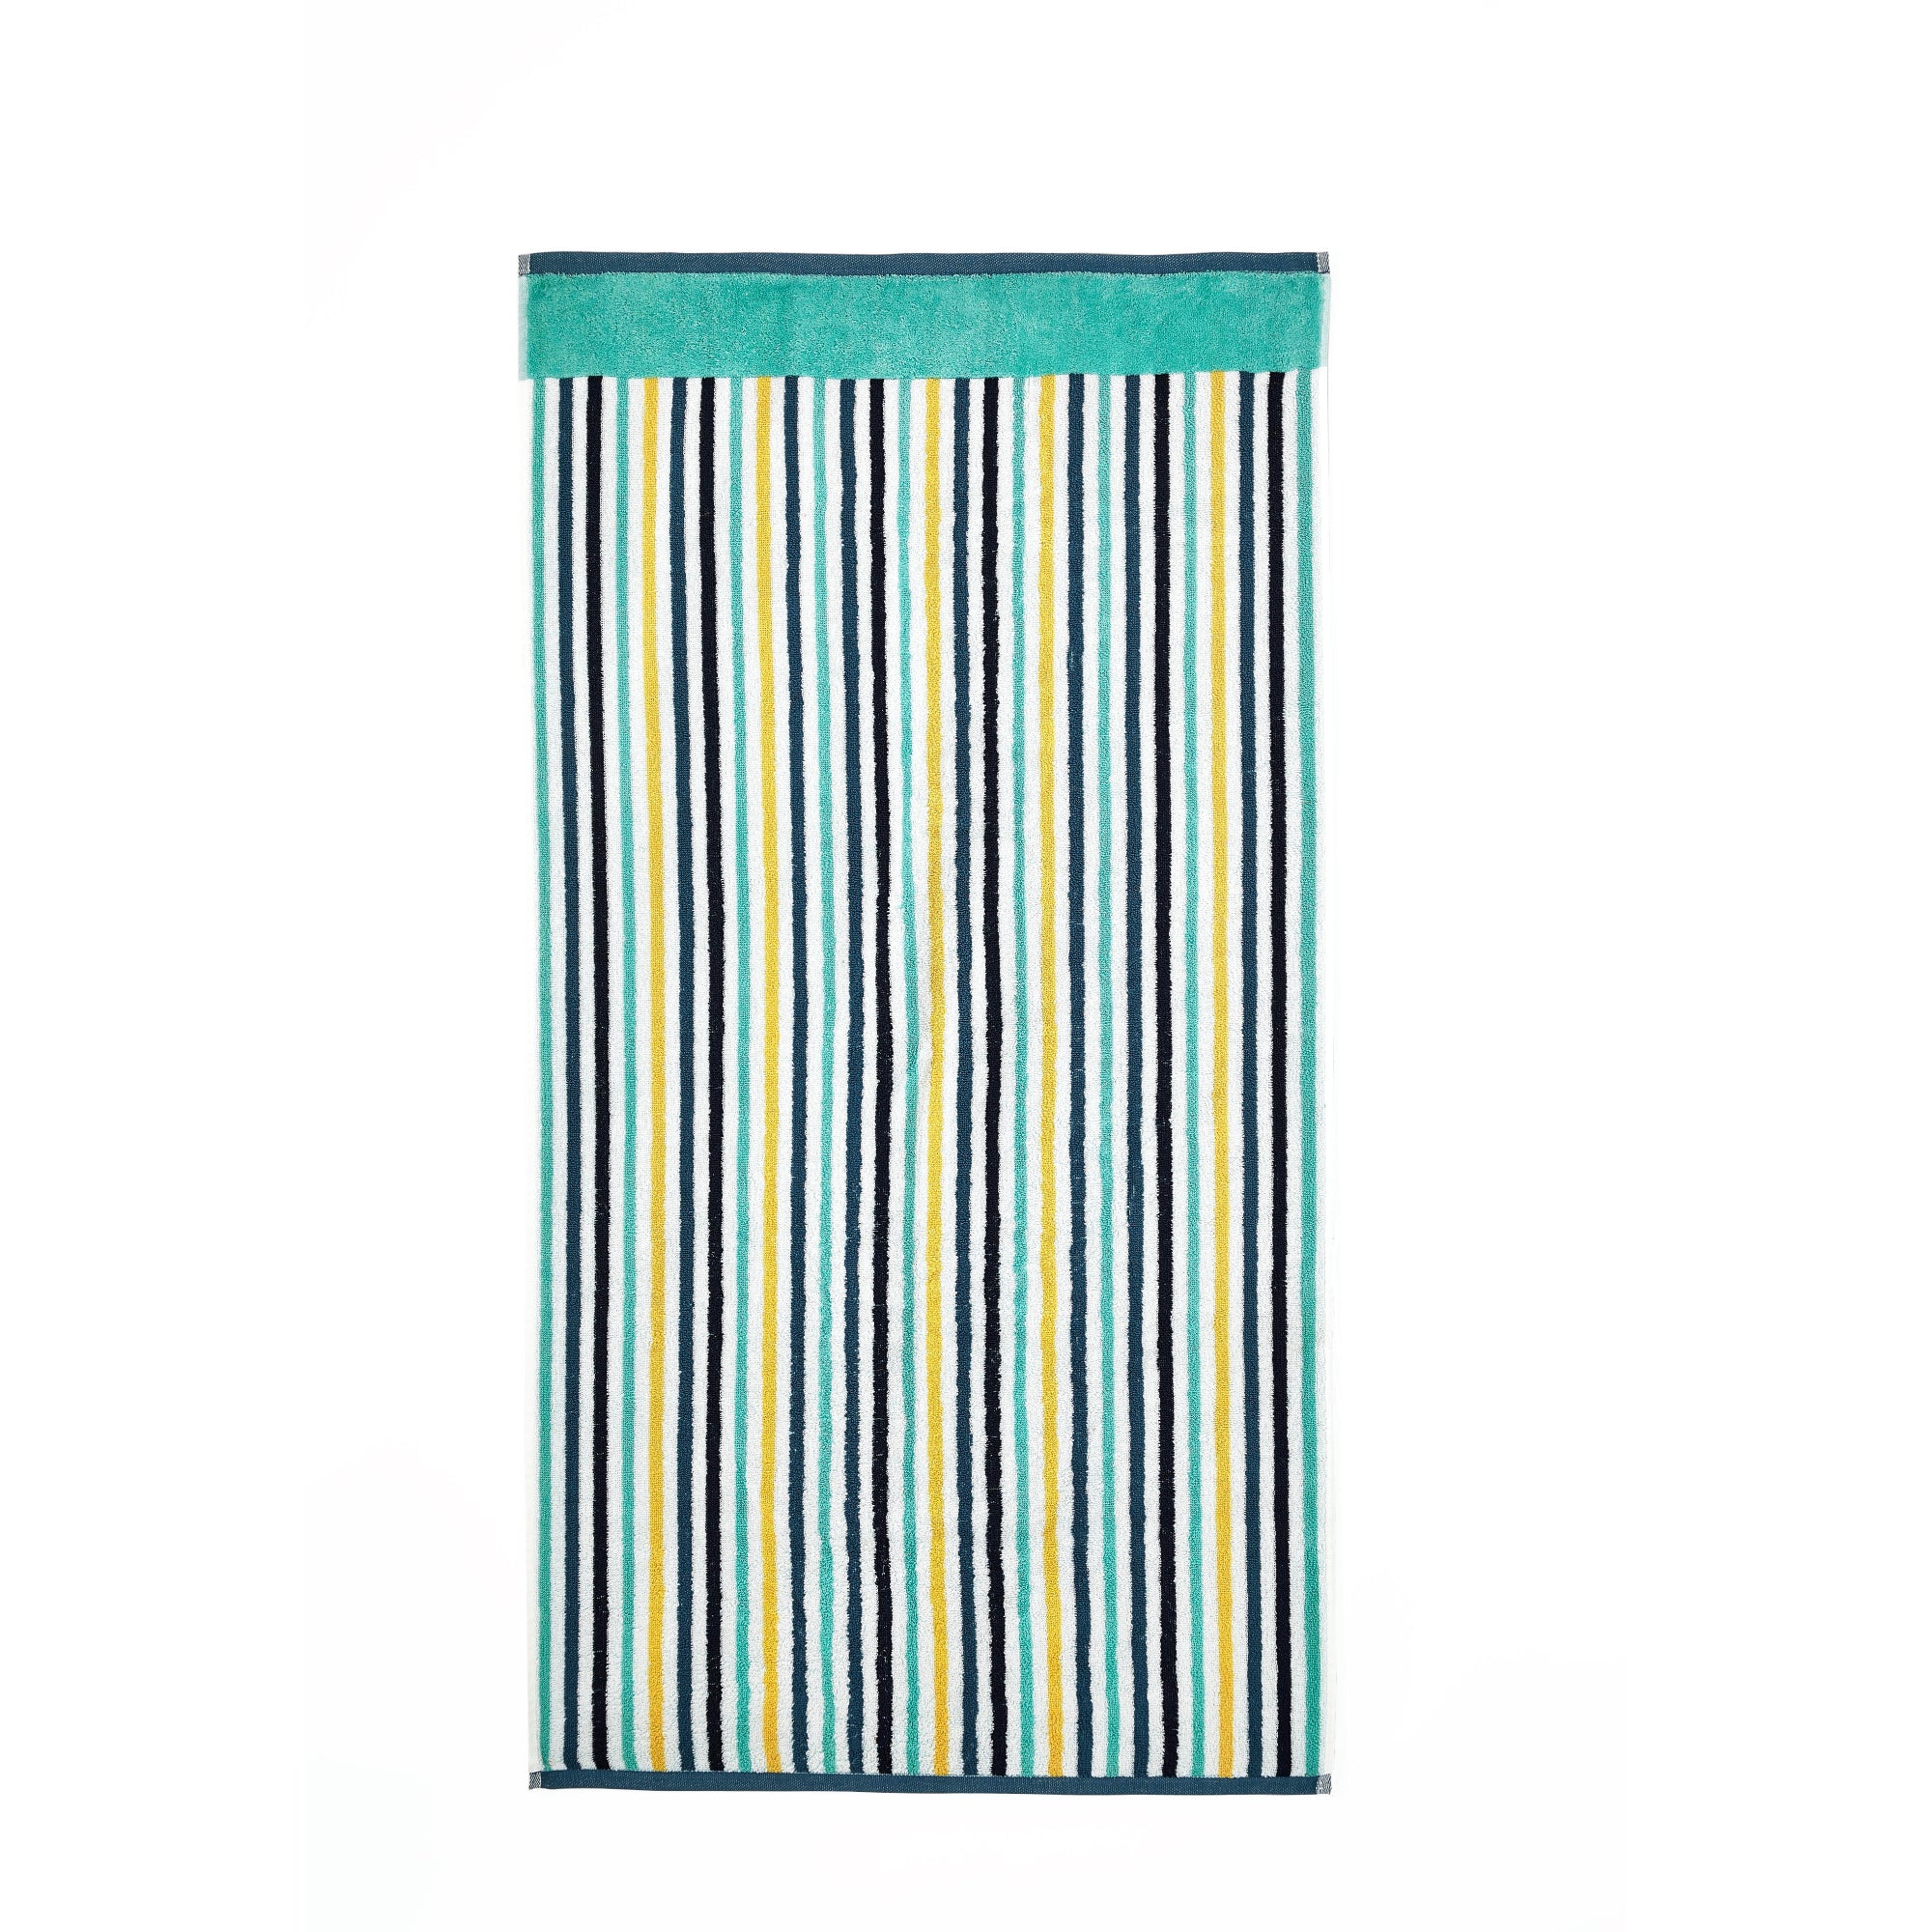 Hand Towel Nautical Stripe by Fusion in Multi